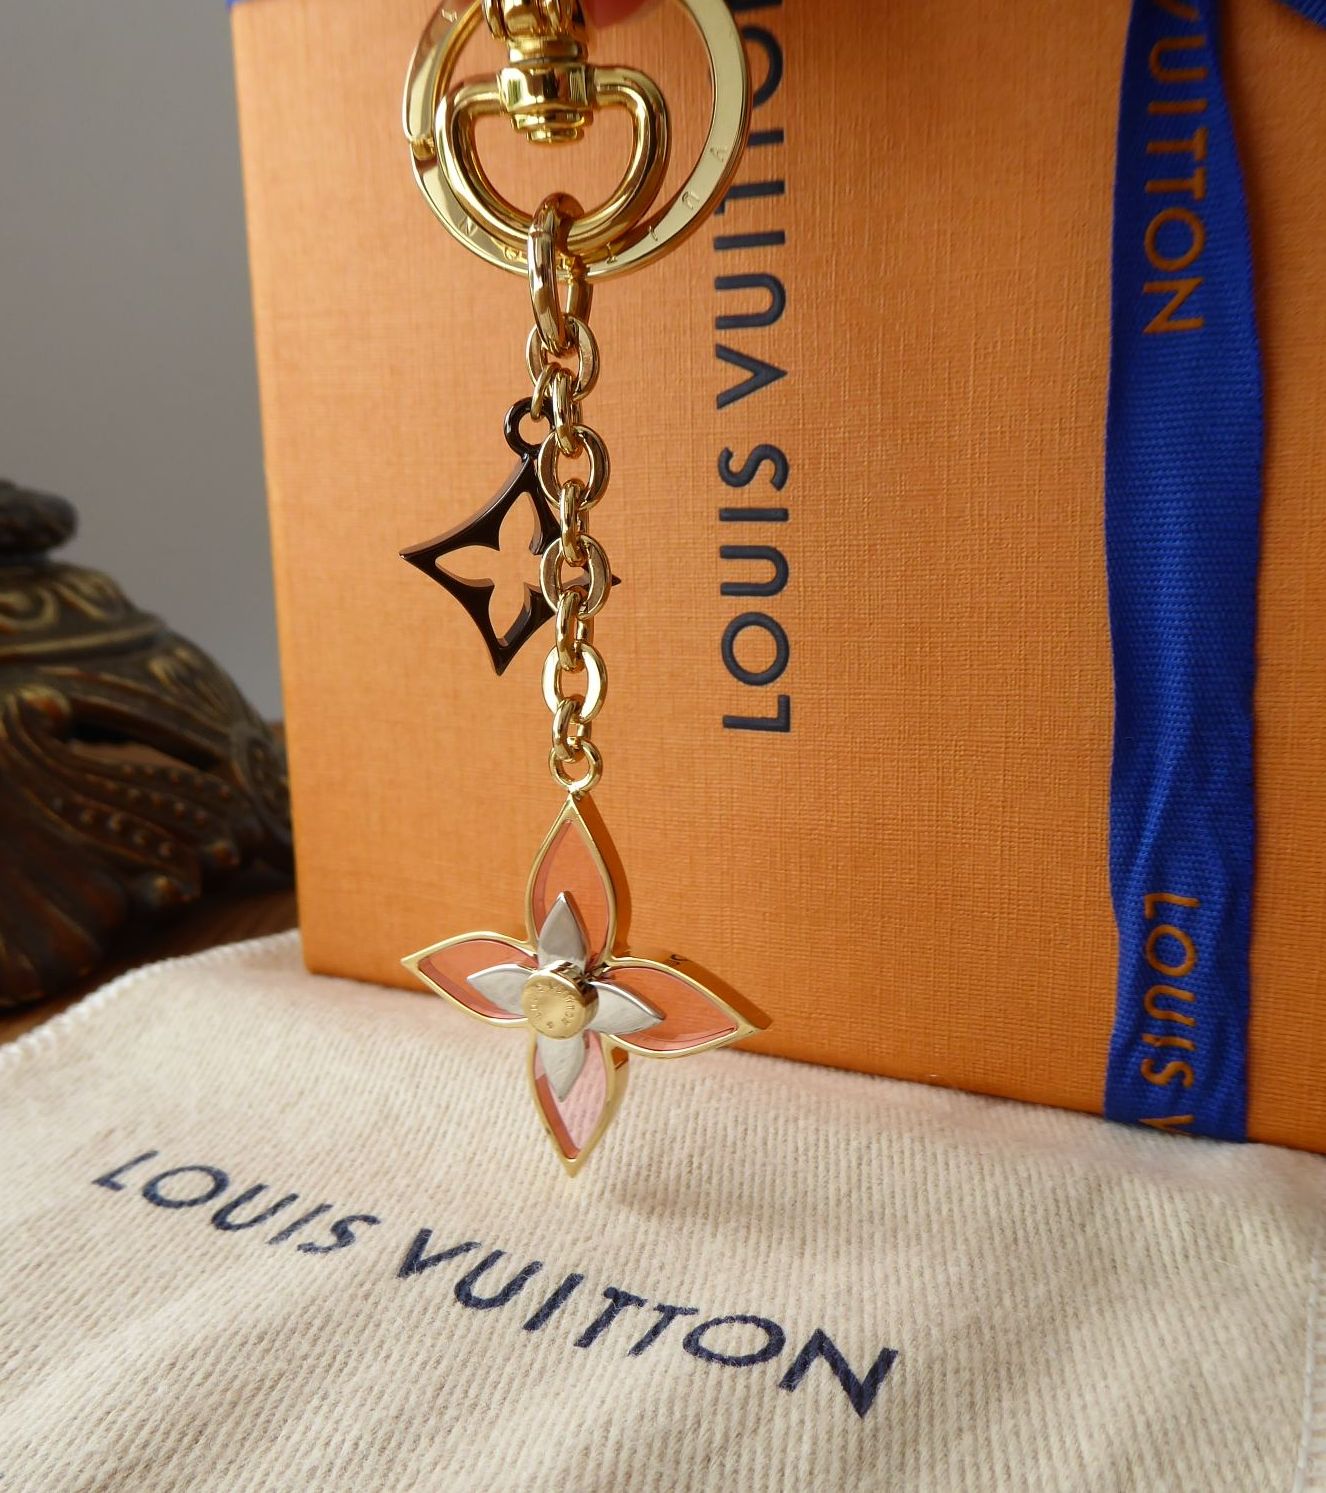 Louis Vuitton Blooming Flowers Bb Bag Charm and Key Holder